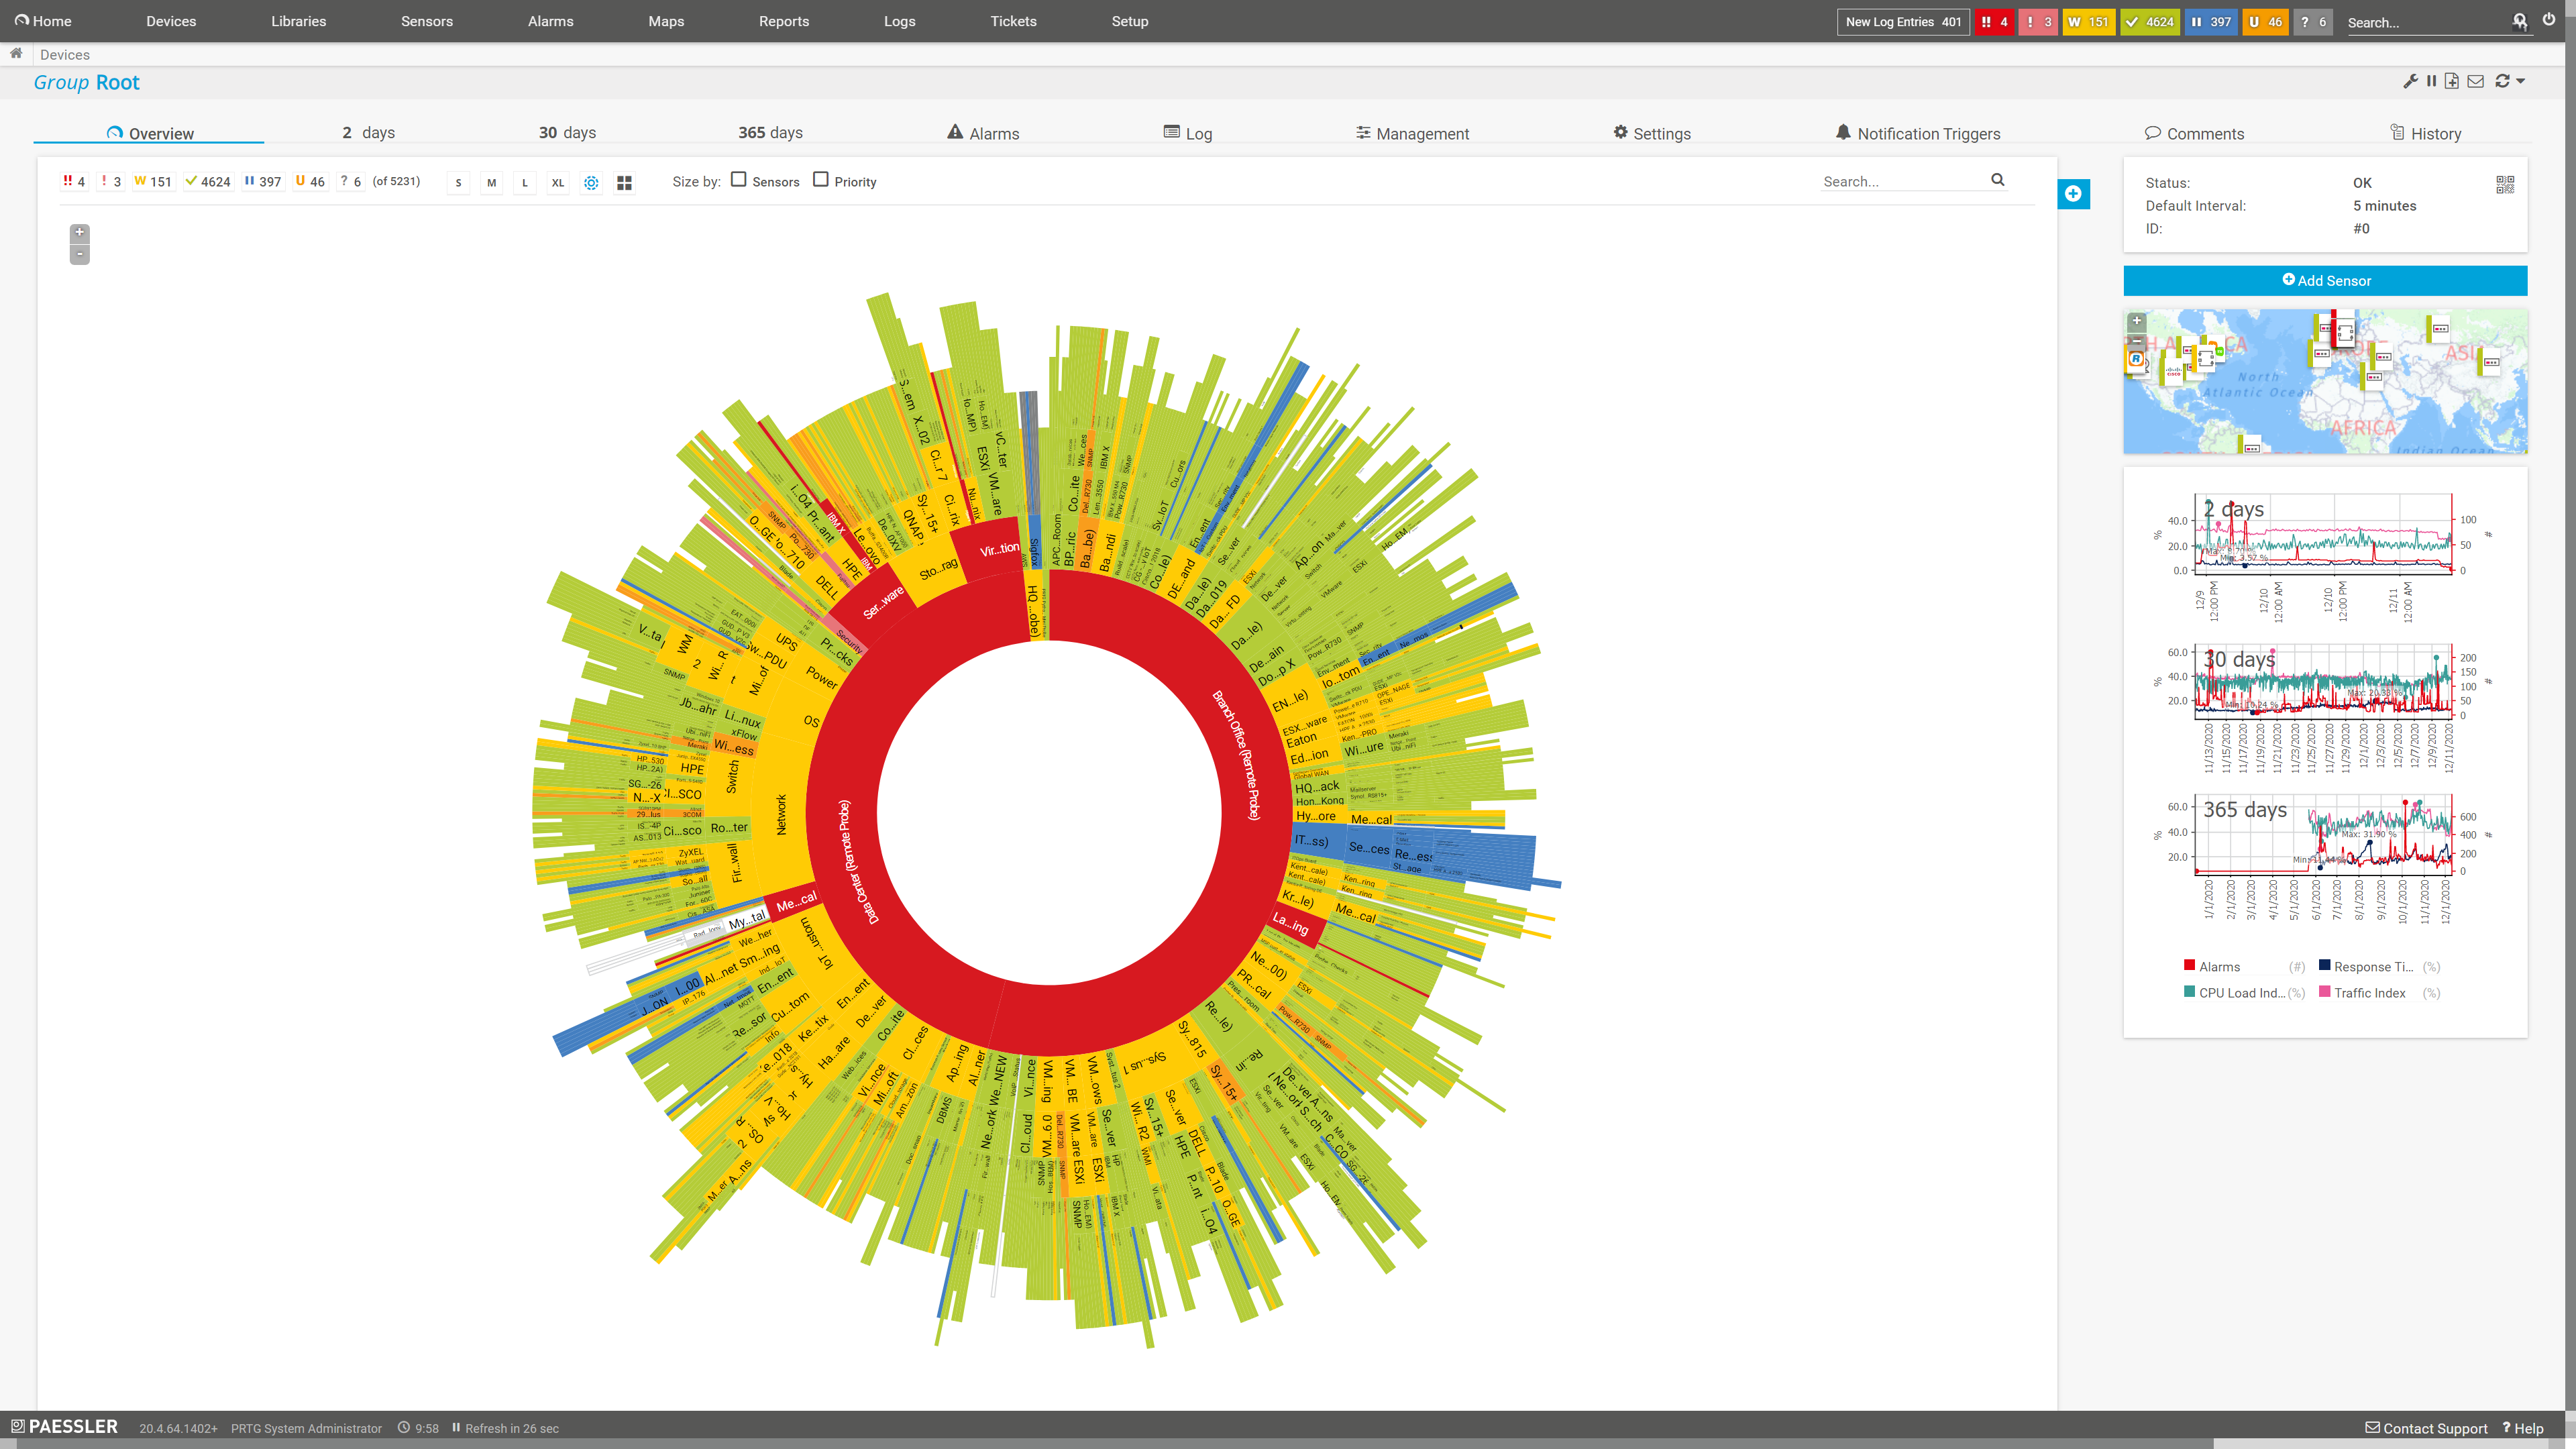 Display all network components and their current status at a glance with the Sunburst view of PRTG